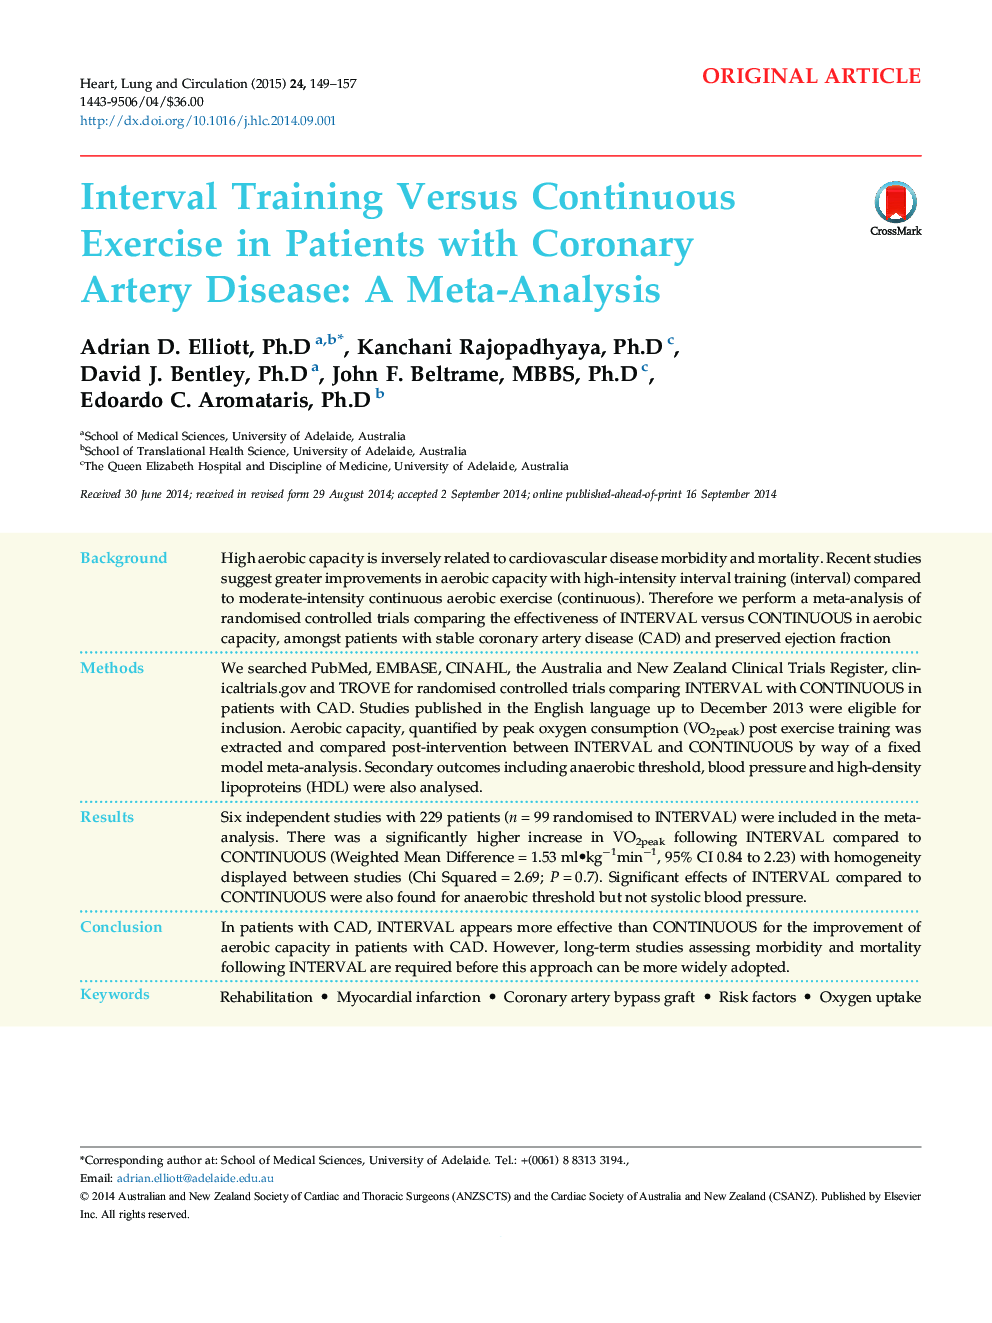 Interval Training Versus Continuous Exercise in Patients with Coronary Artery Disease: A Meta-Analysis